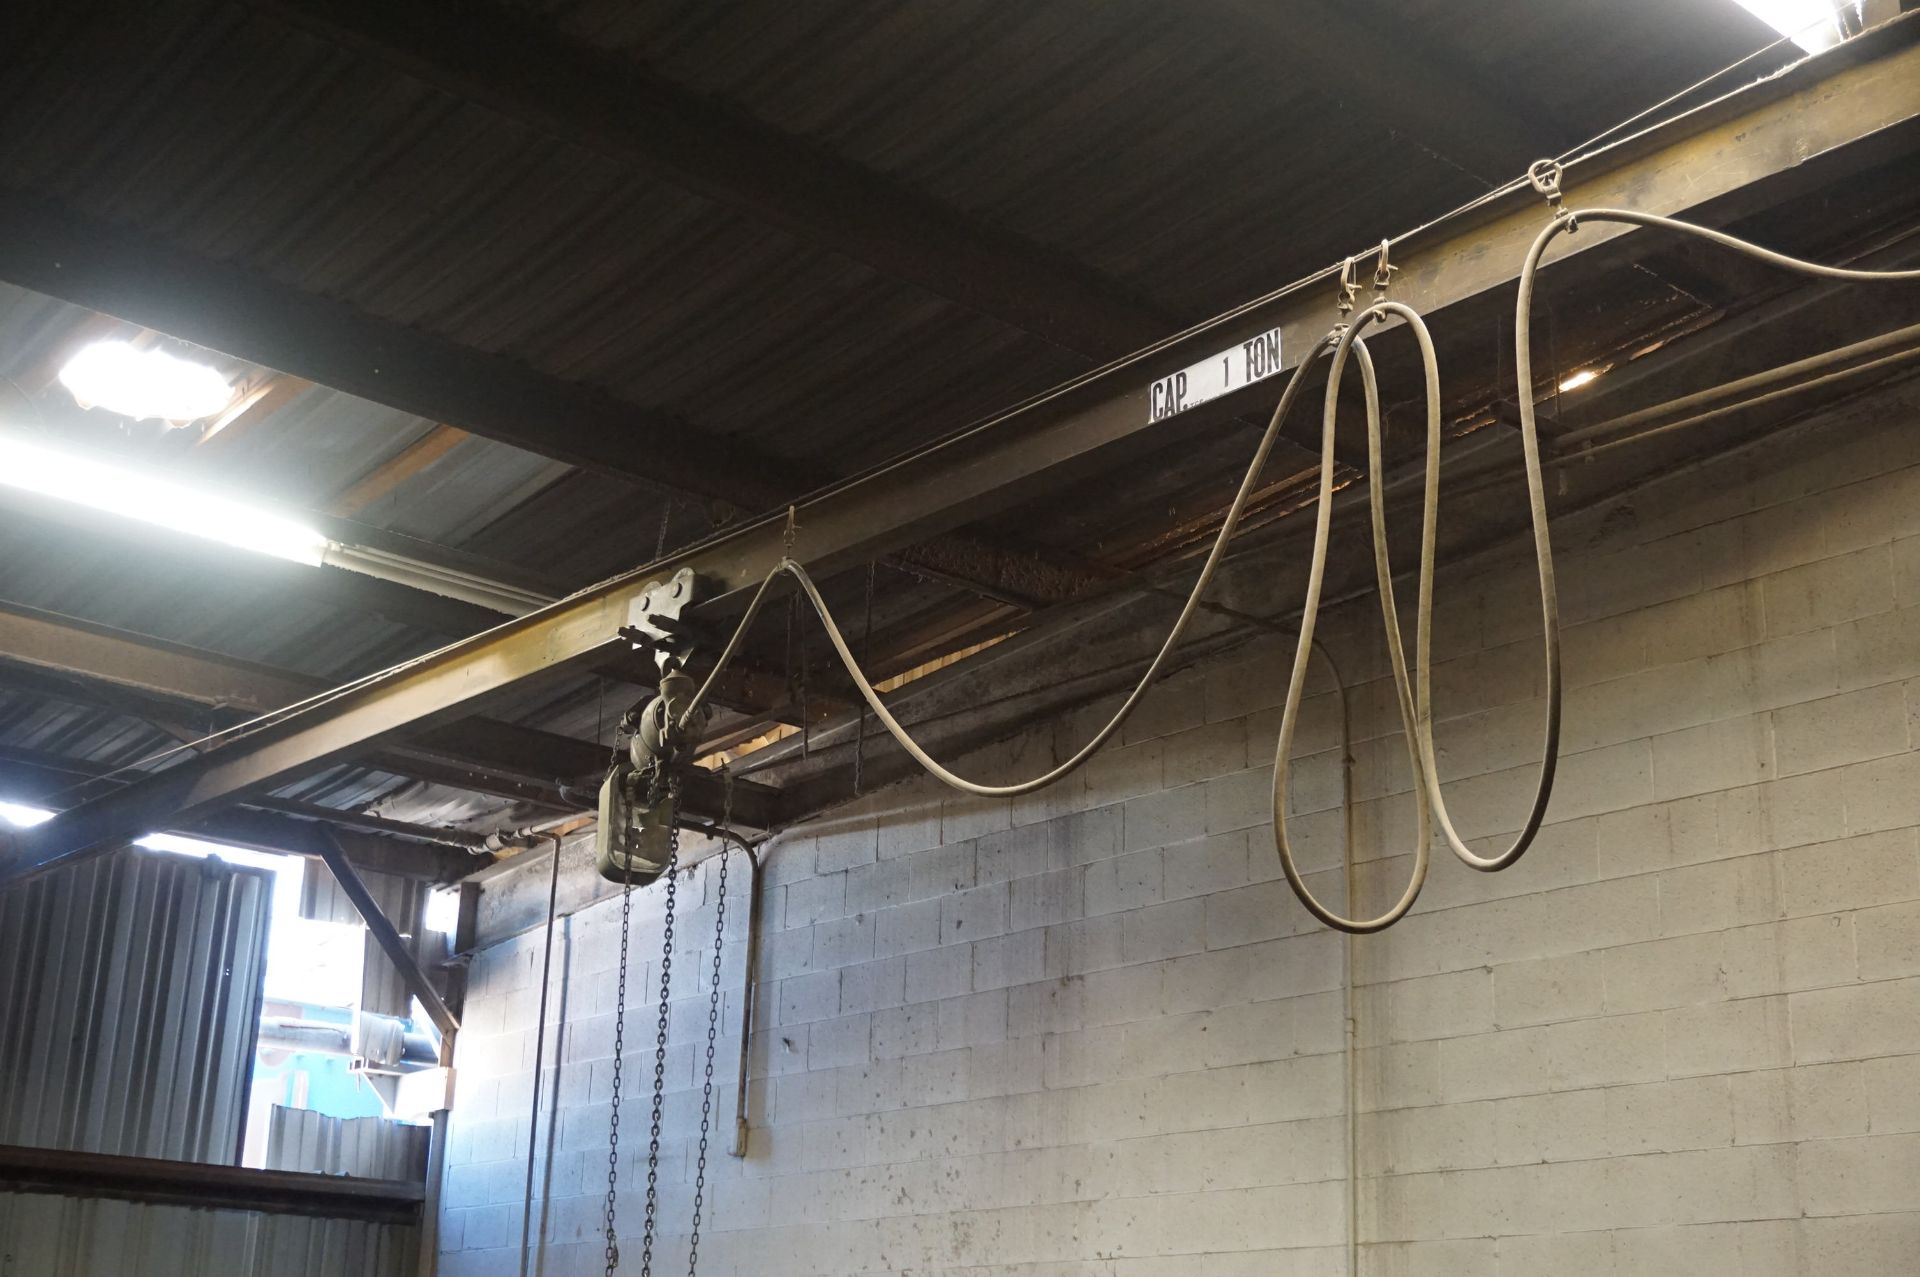 OVERHEAD CRANE TO INCLUDE: 1 TON AIR HOIST, HOIST TROLLEY, CHAIN CONTROL, WITH BRIDGE **Rigging - Image 3 of 3